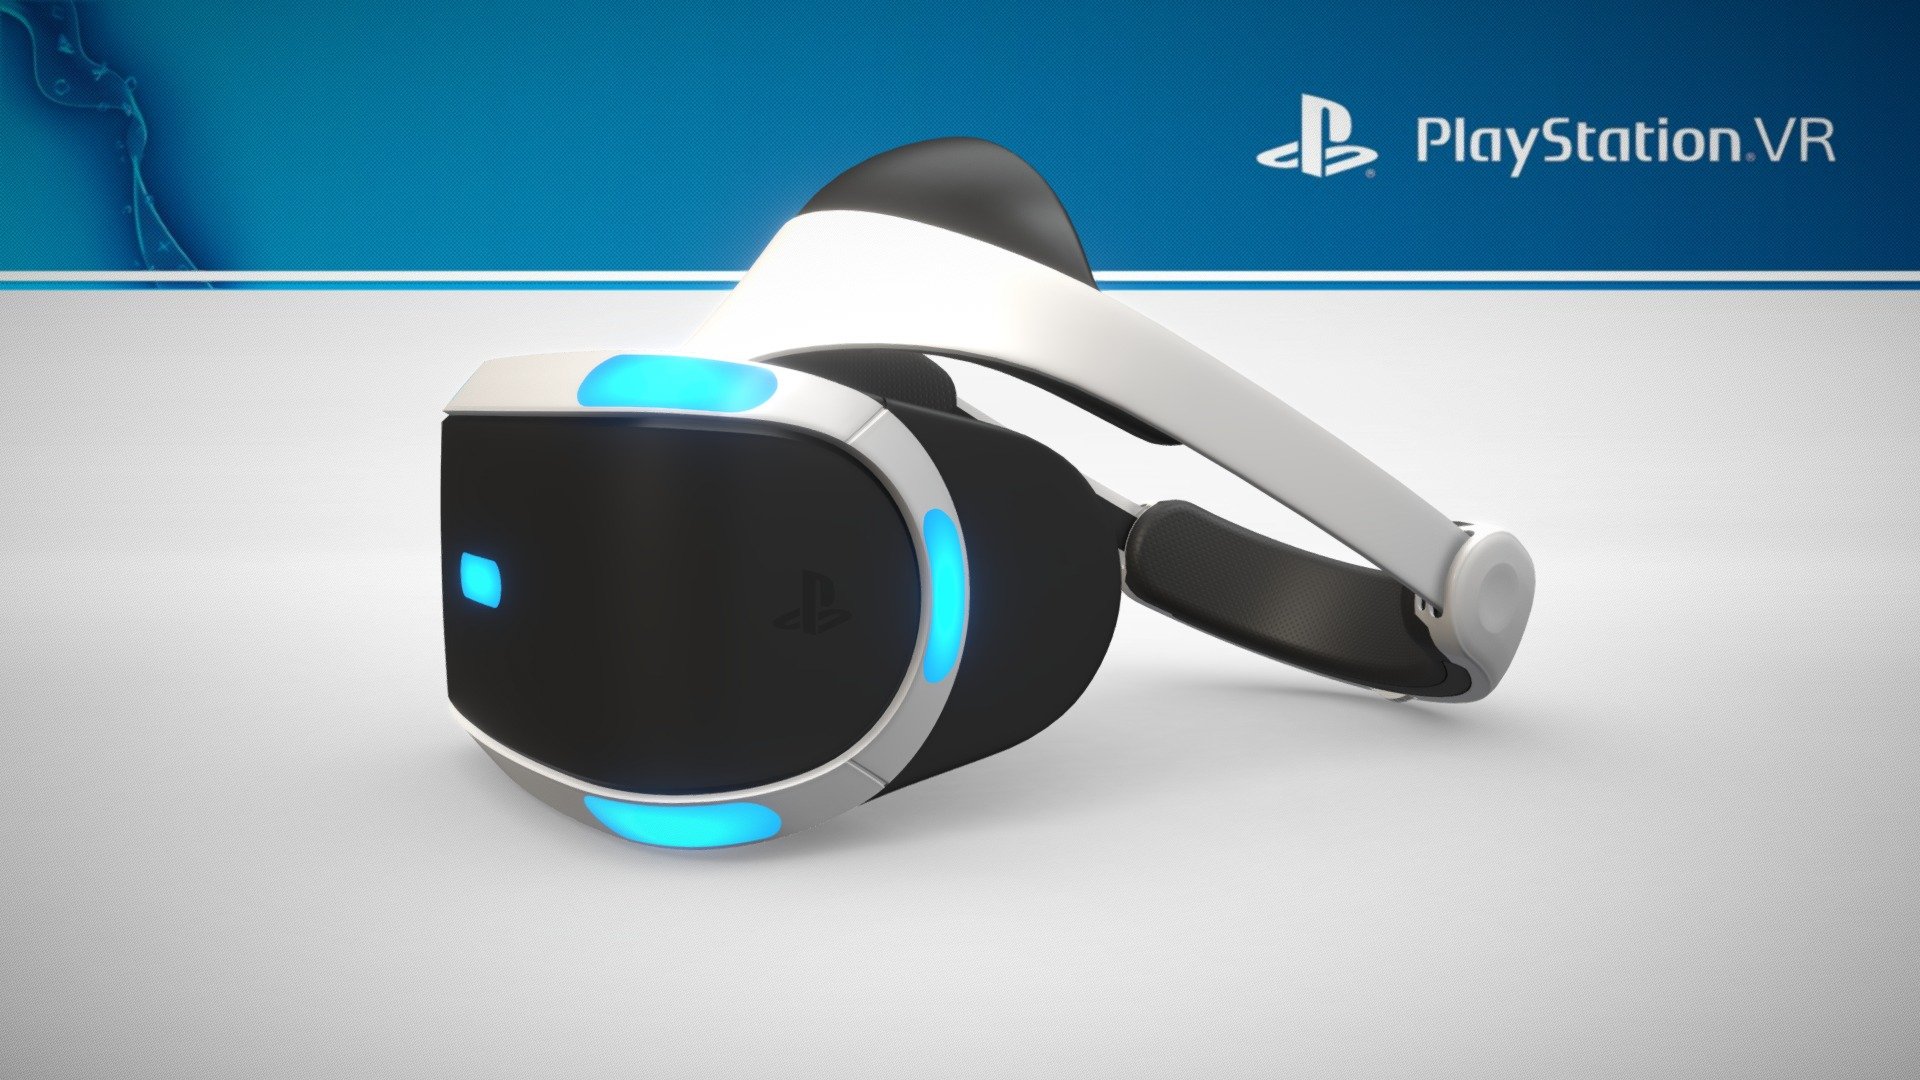 Sony PlayStation VR: Immerse yourself in a vivid virtual world of gaming with this Sony headset for the PlayStation VR. Its 3D audio technology makes sounds sharper and clearer, while the advanced VR display creates an incredibly lifelike gaming experience. This plug-and-play Sony headset is fully adjustable for optimal comfort, even after wearing it for long periods.

Model by shaderbytes - PlayStation VR - Buy Royalty Free 3D model by Virtual Studio (@virtualstudio) 3d model